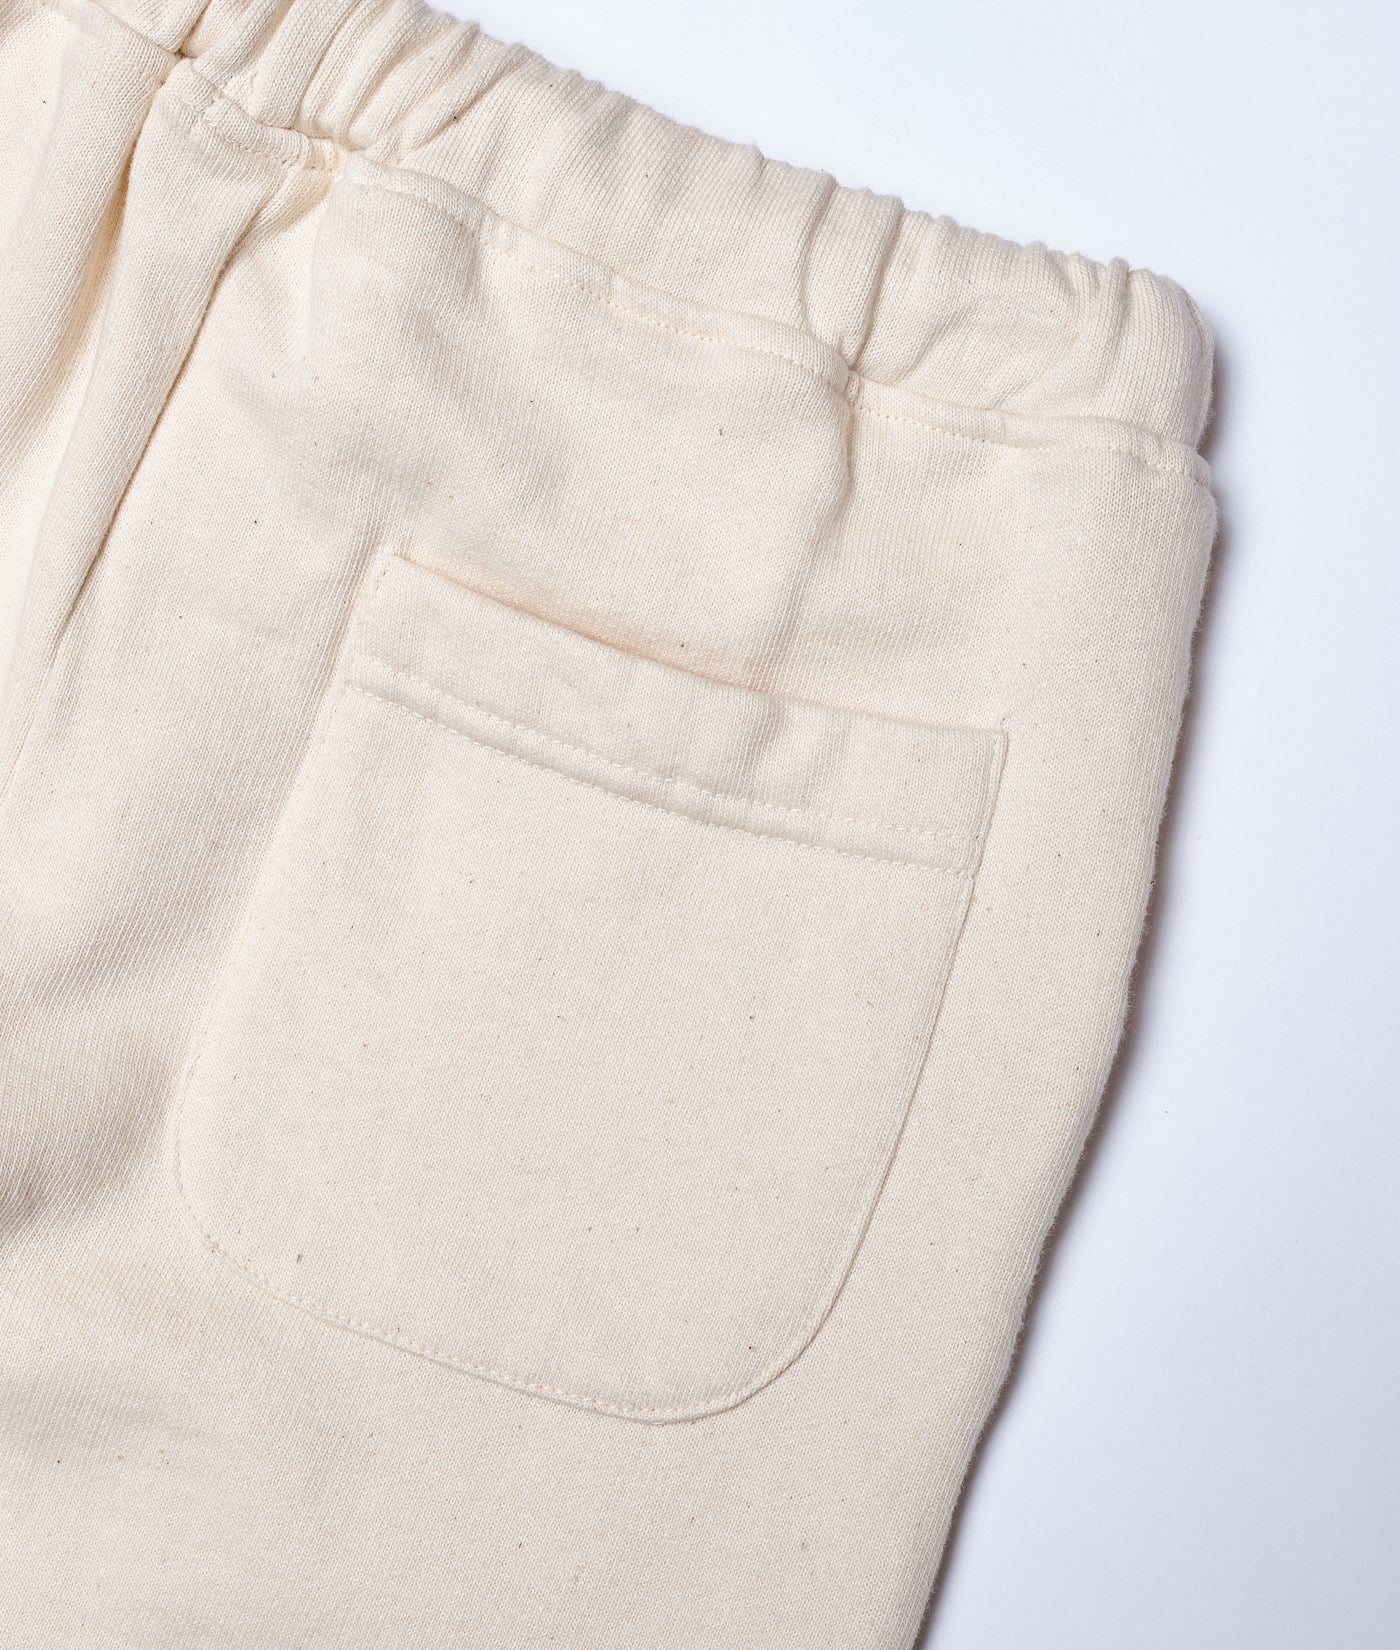 Industry of All Nations Kids Sweatpants, Undyed